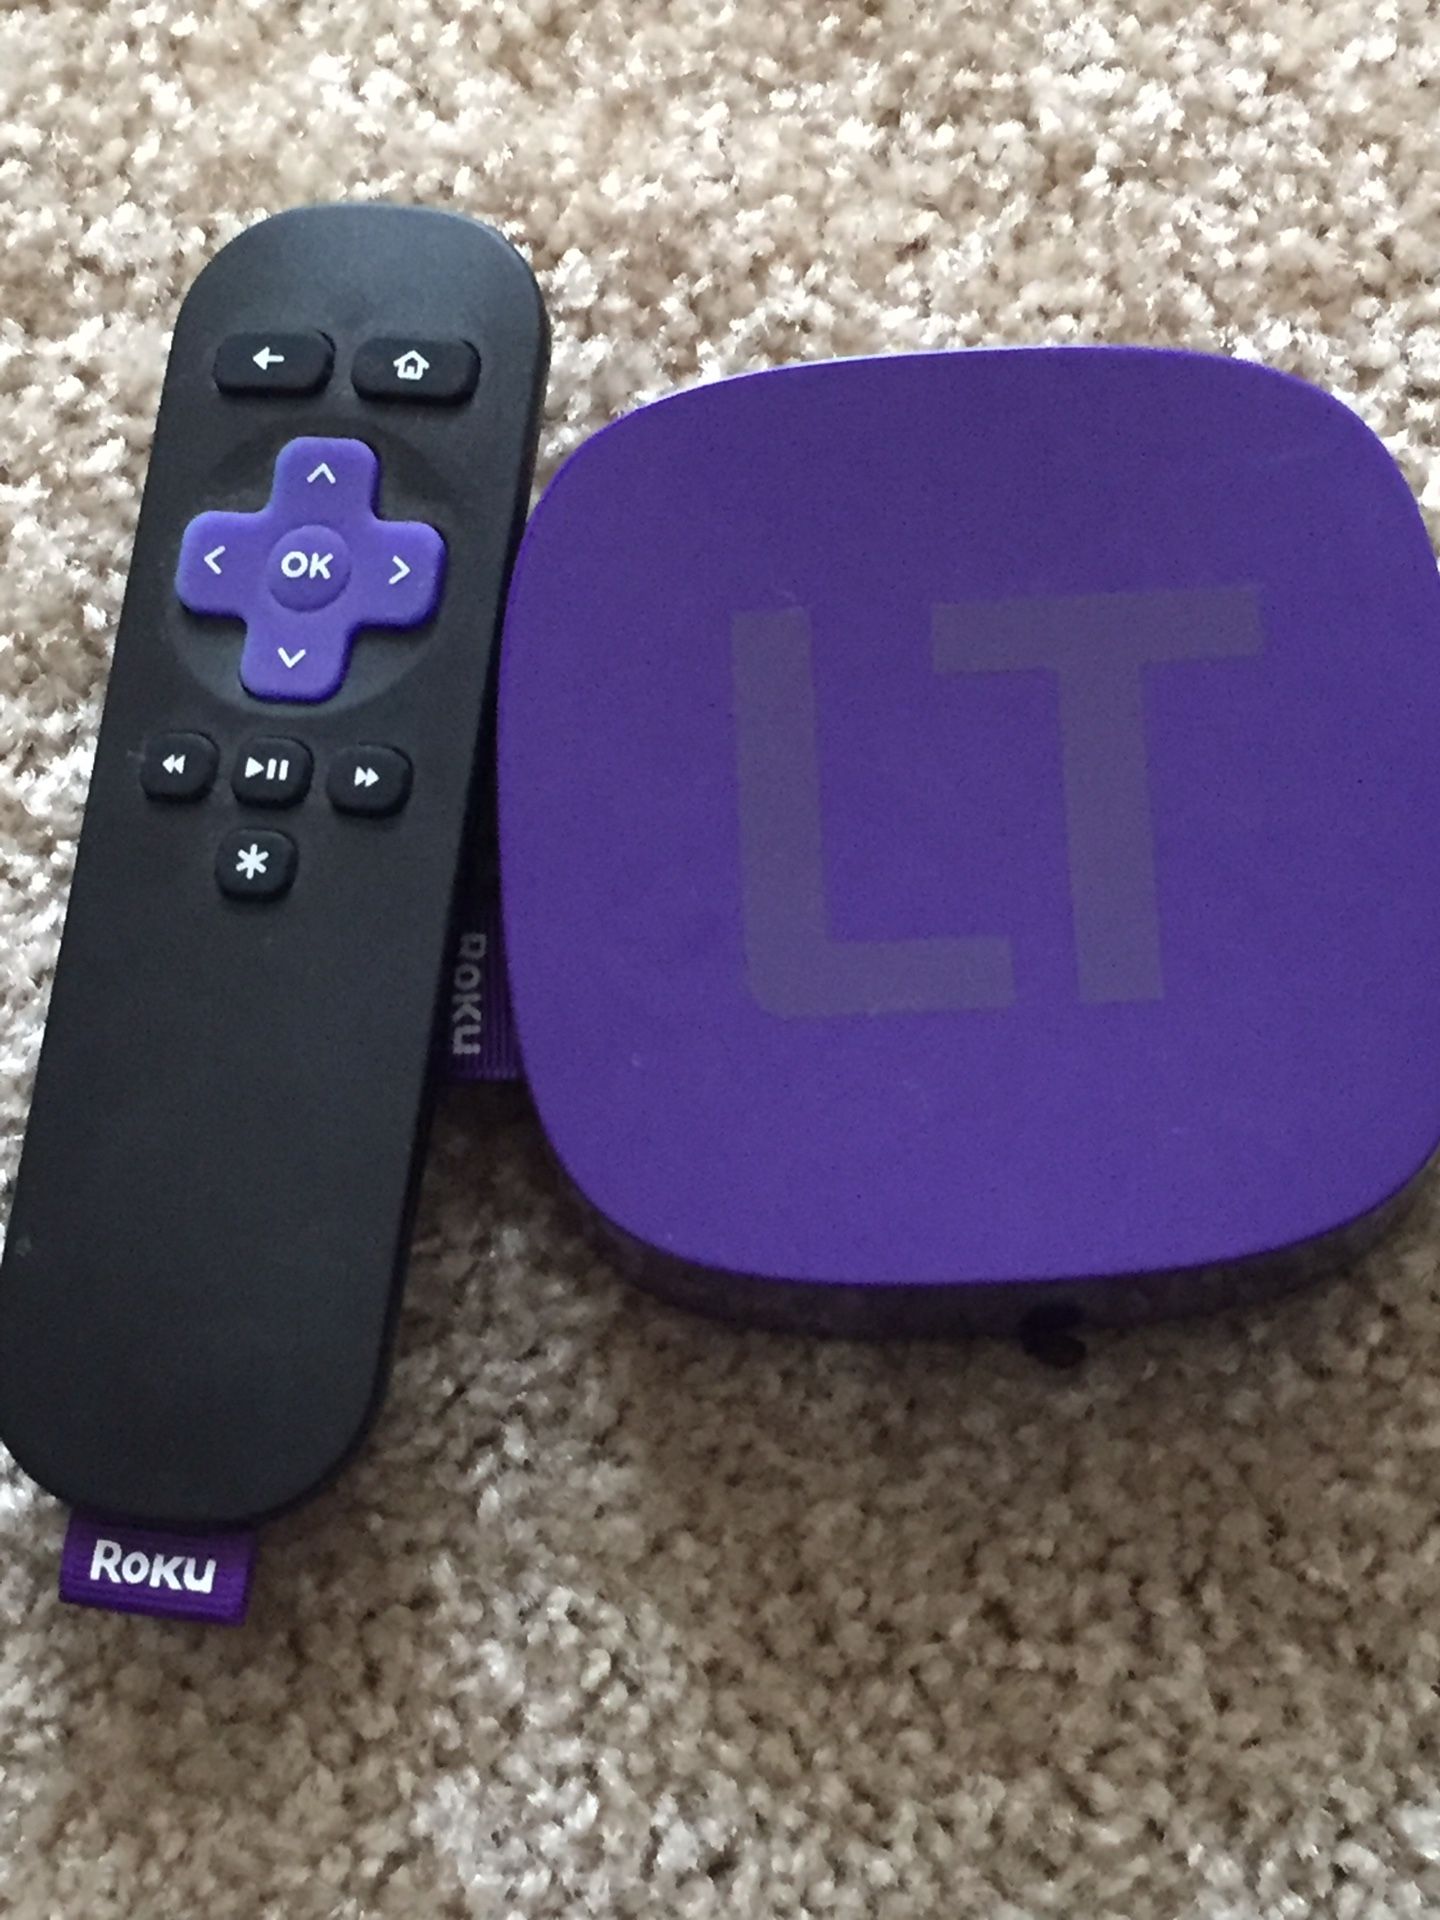 Roku LT streaming player with remote